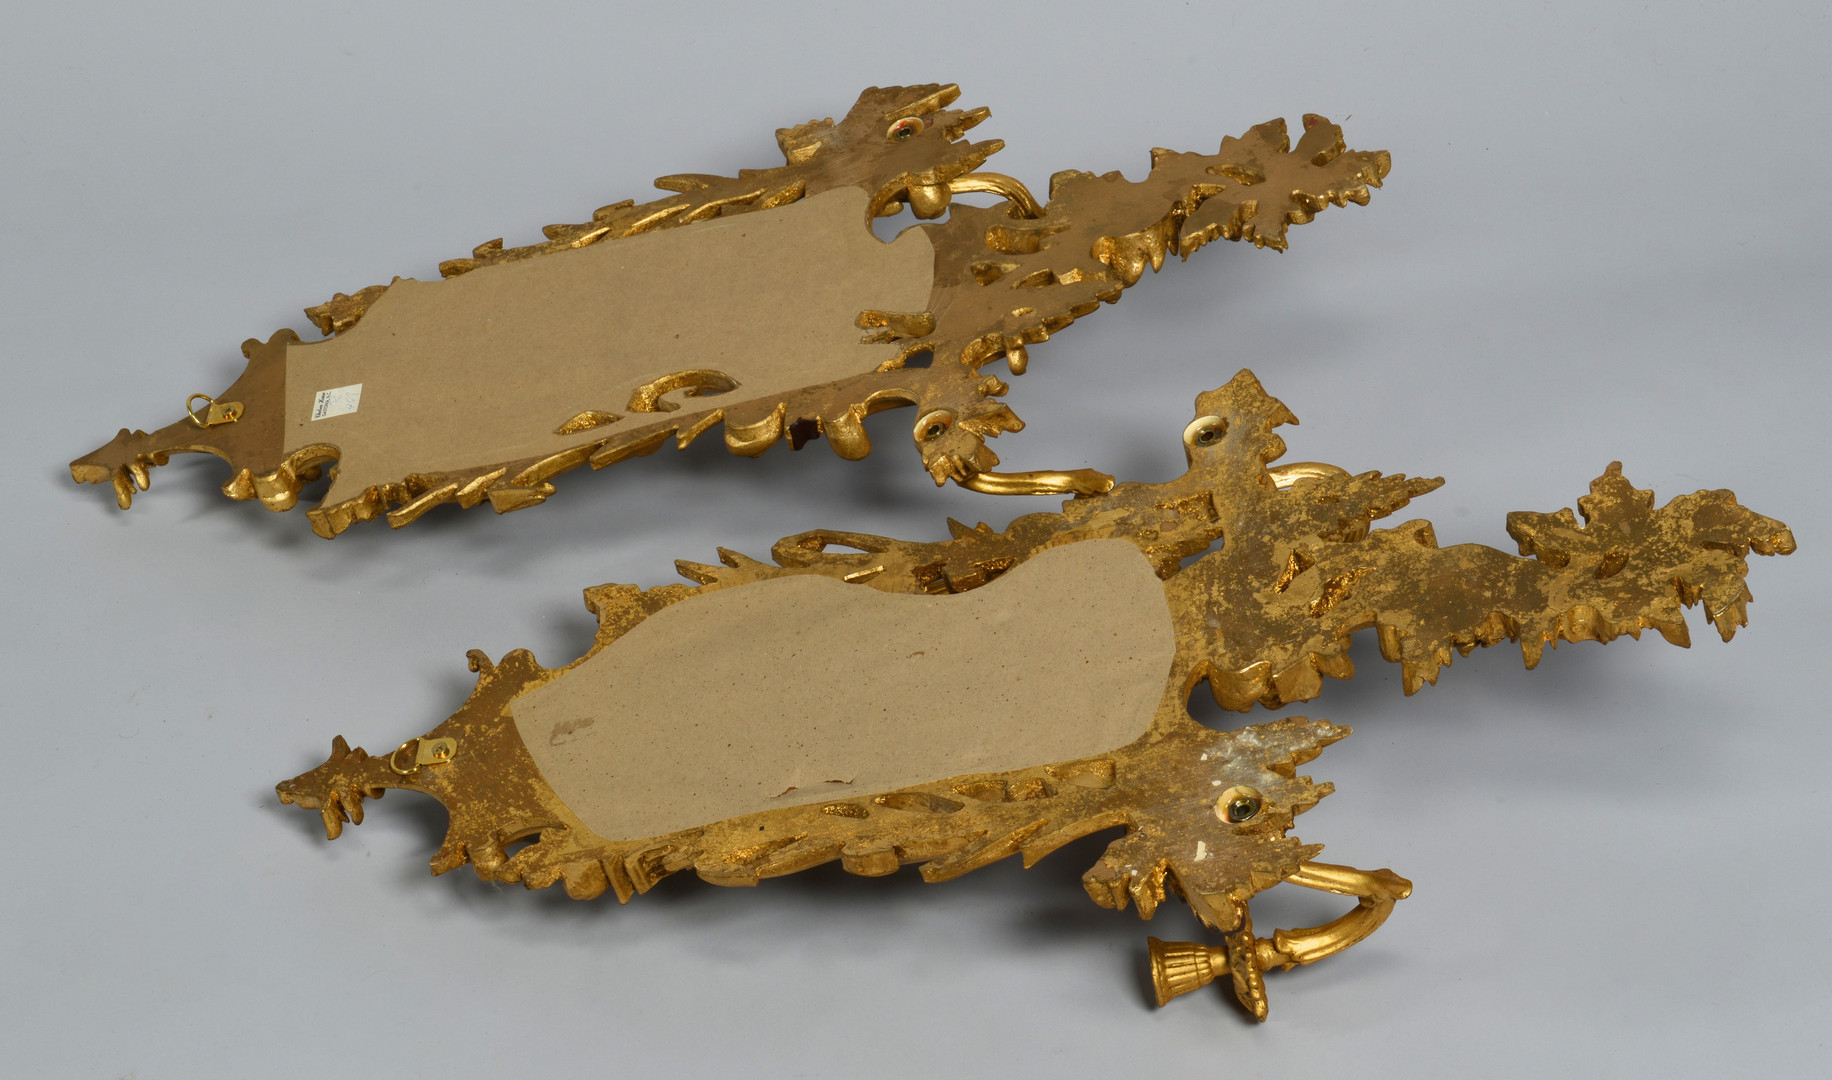 Lot 772: Chinoiserie Mirror & Sconces